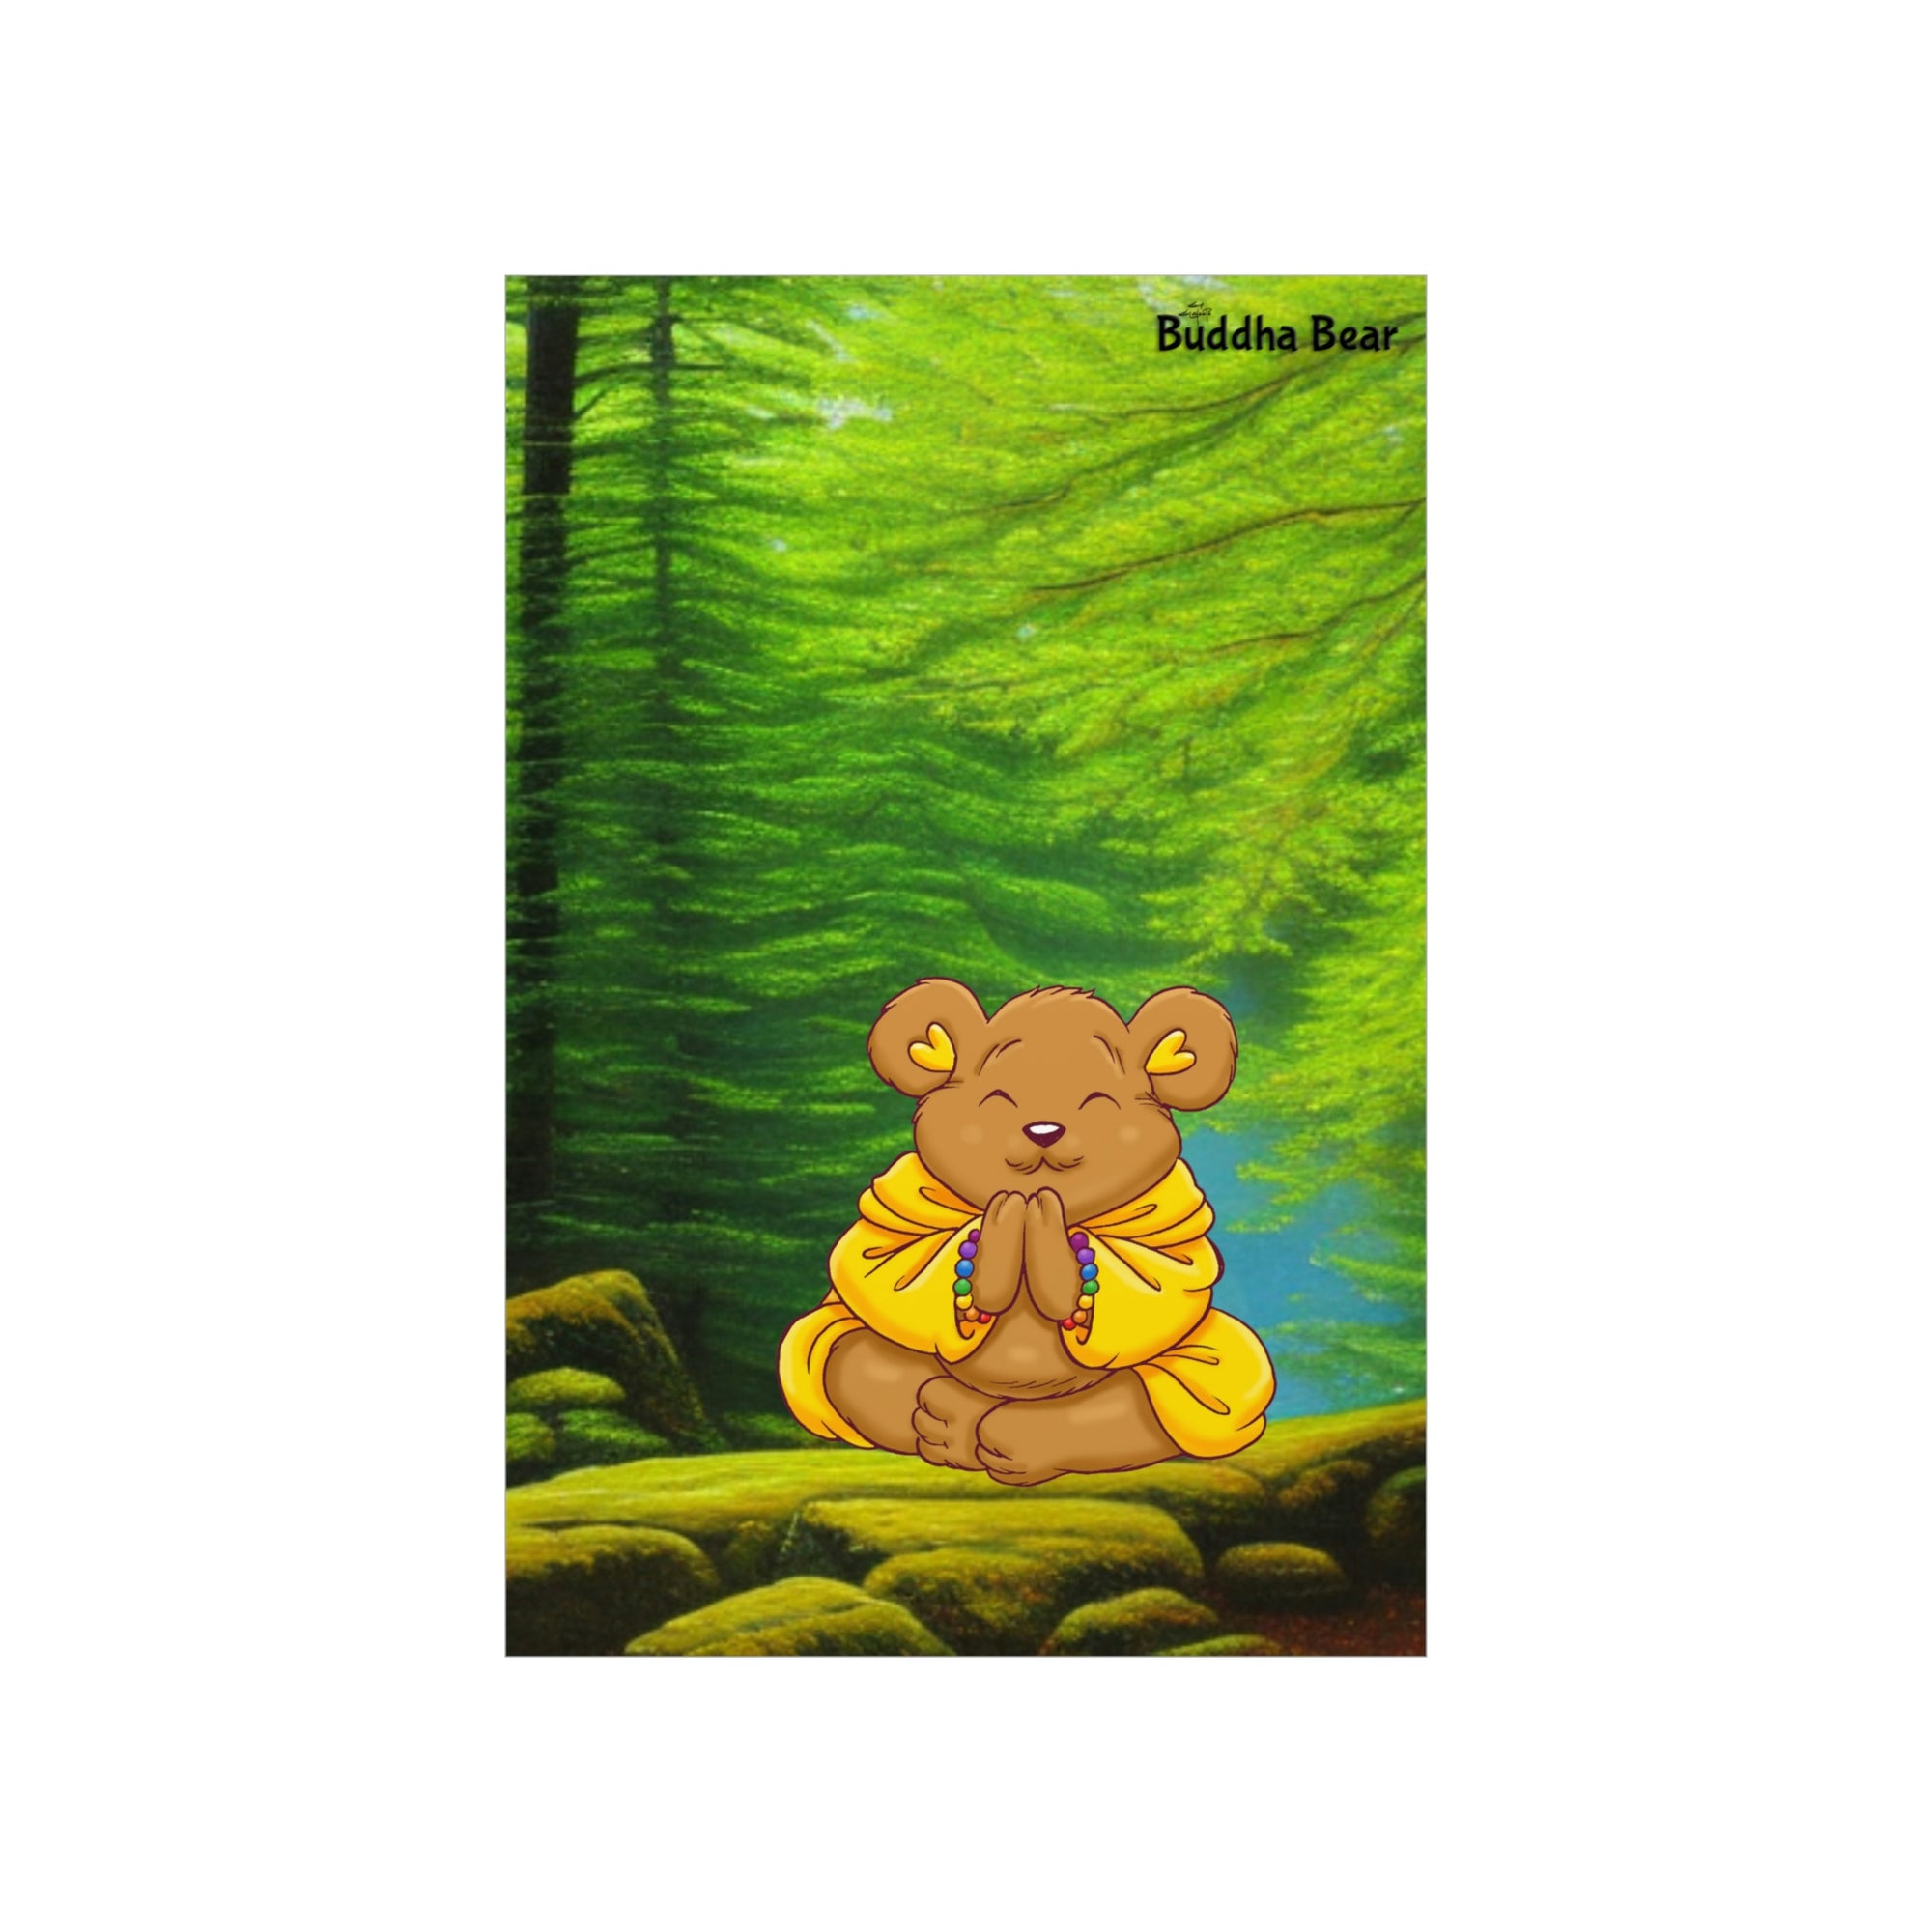 Buddha Bear's Forest Of Meditation Poster